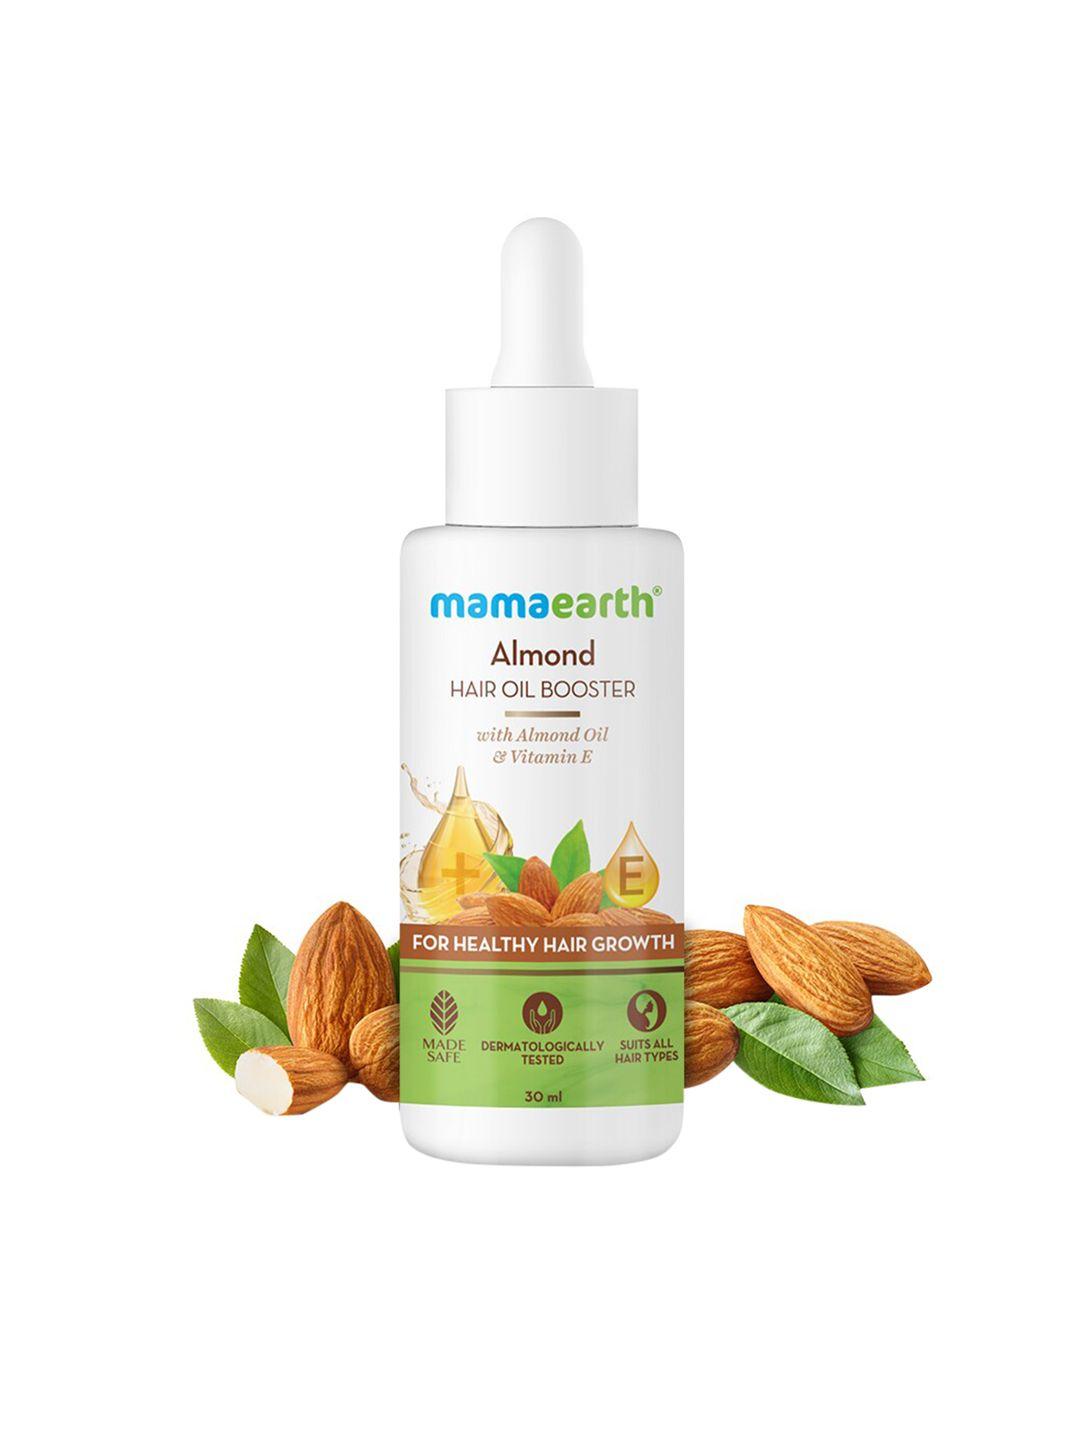 mamaearth-almond-hair-oil-booster-with-almond-oil-&-vitamin-e-&-for-healthy-hair-growth---30-ml